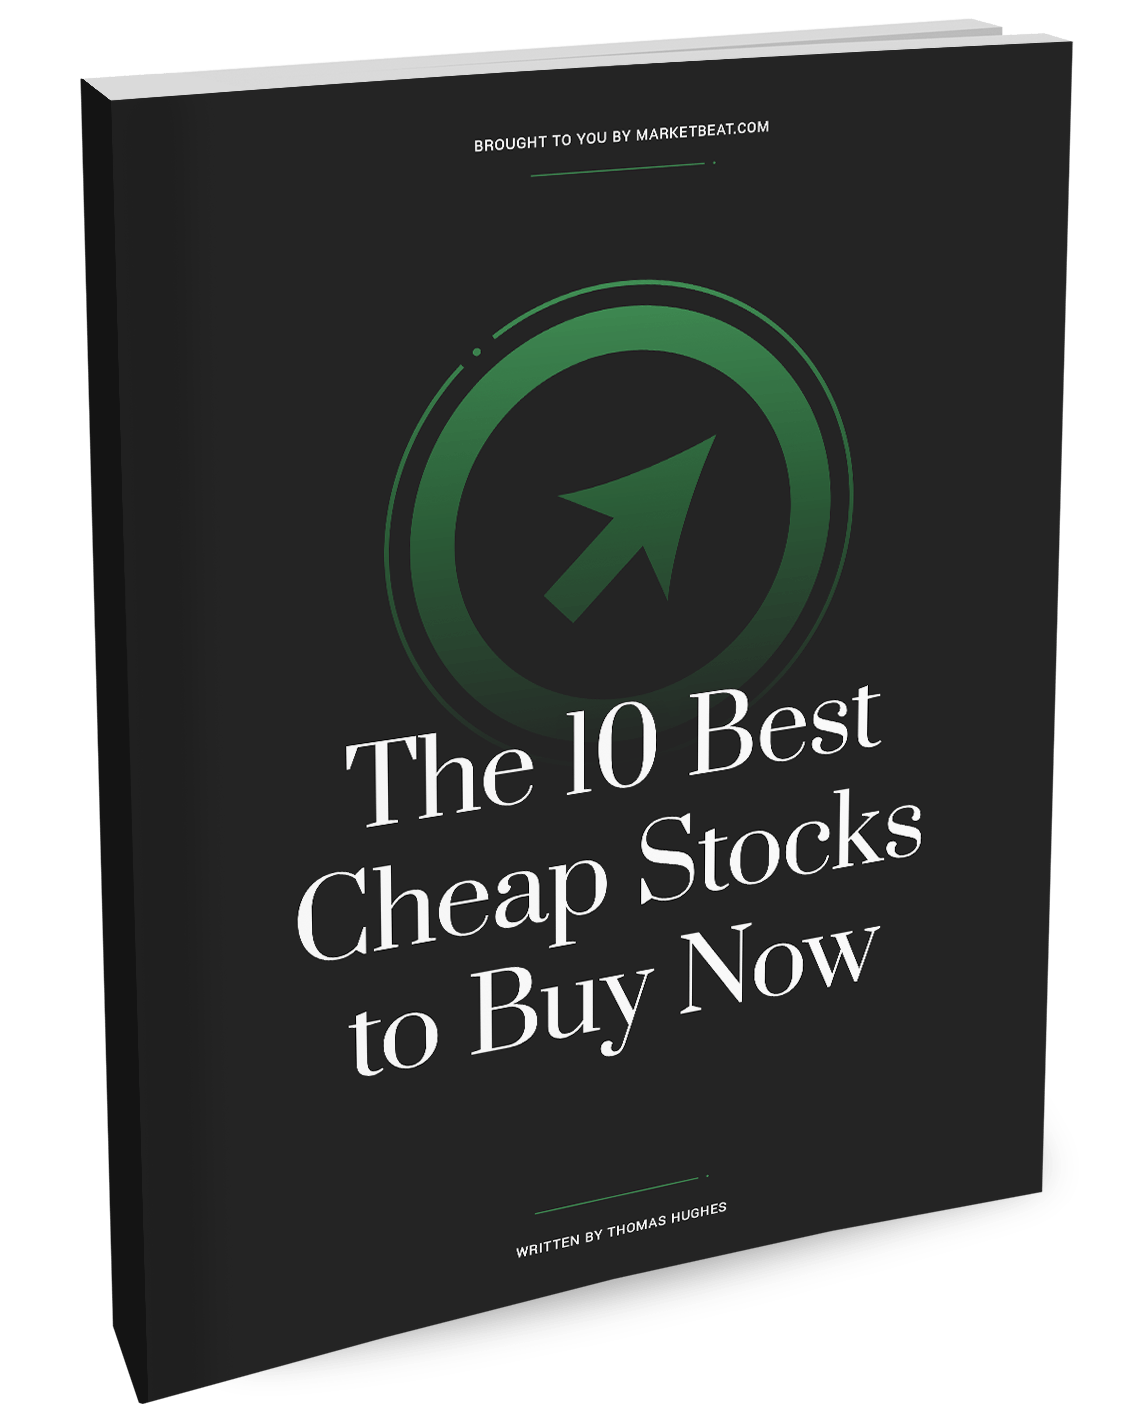 The 10 best and cheapest stocks to buy now cover